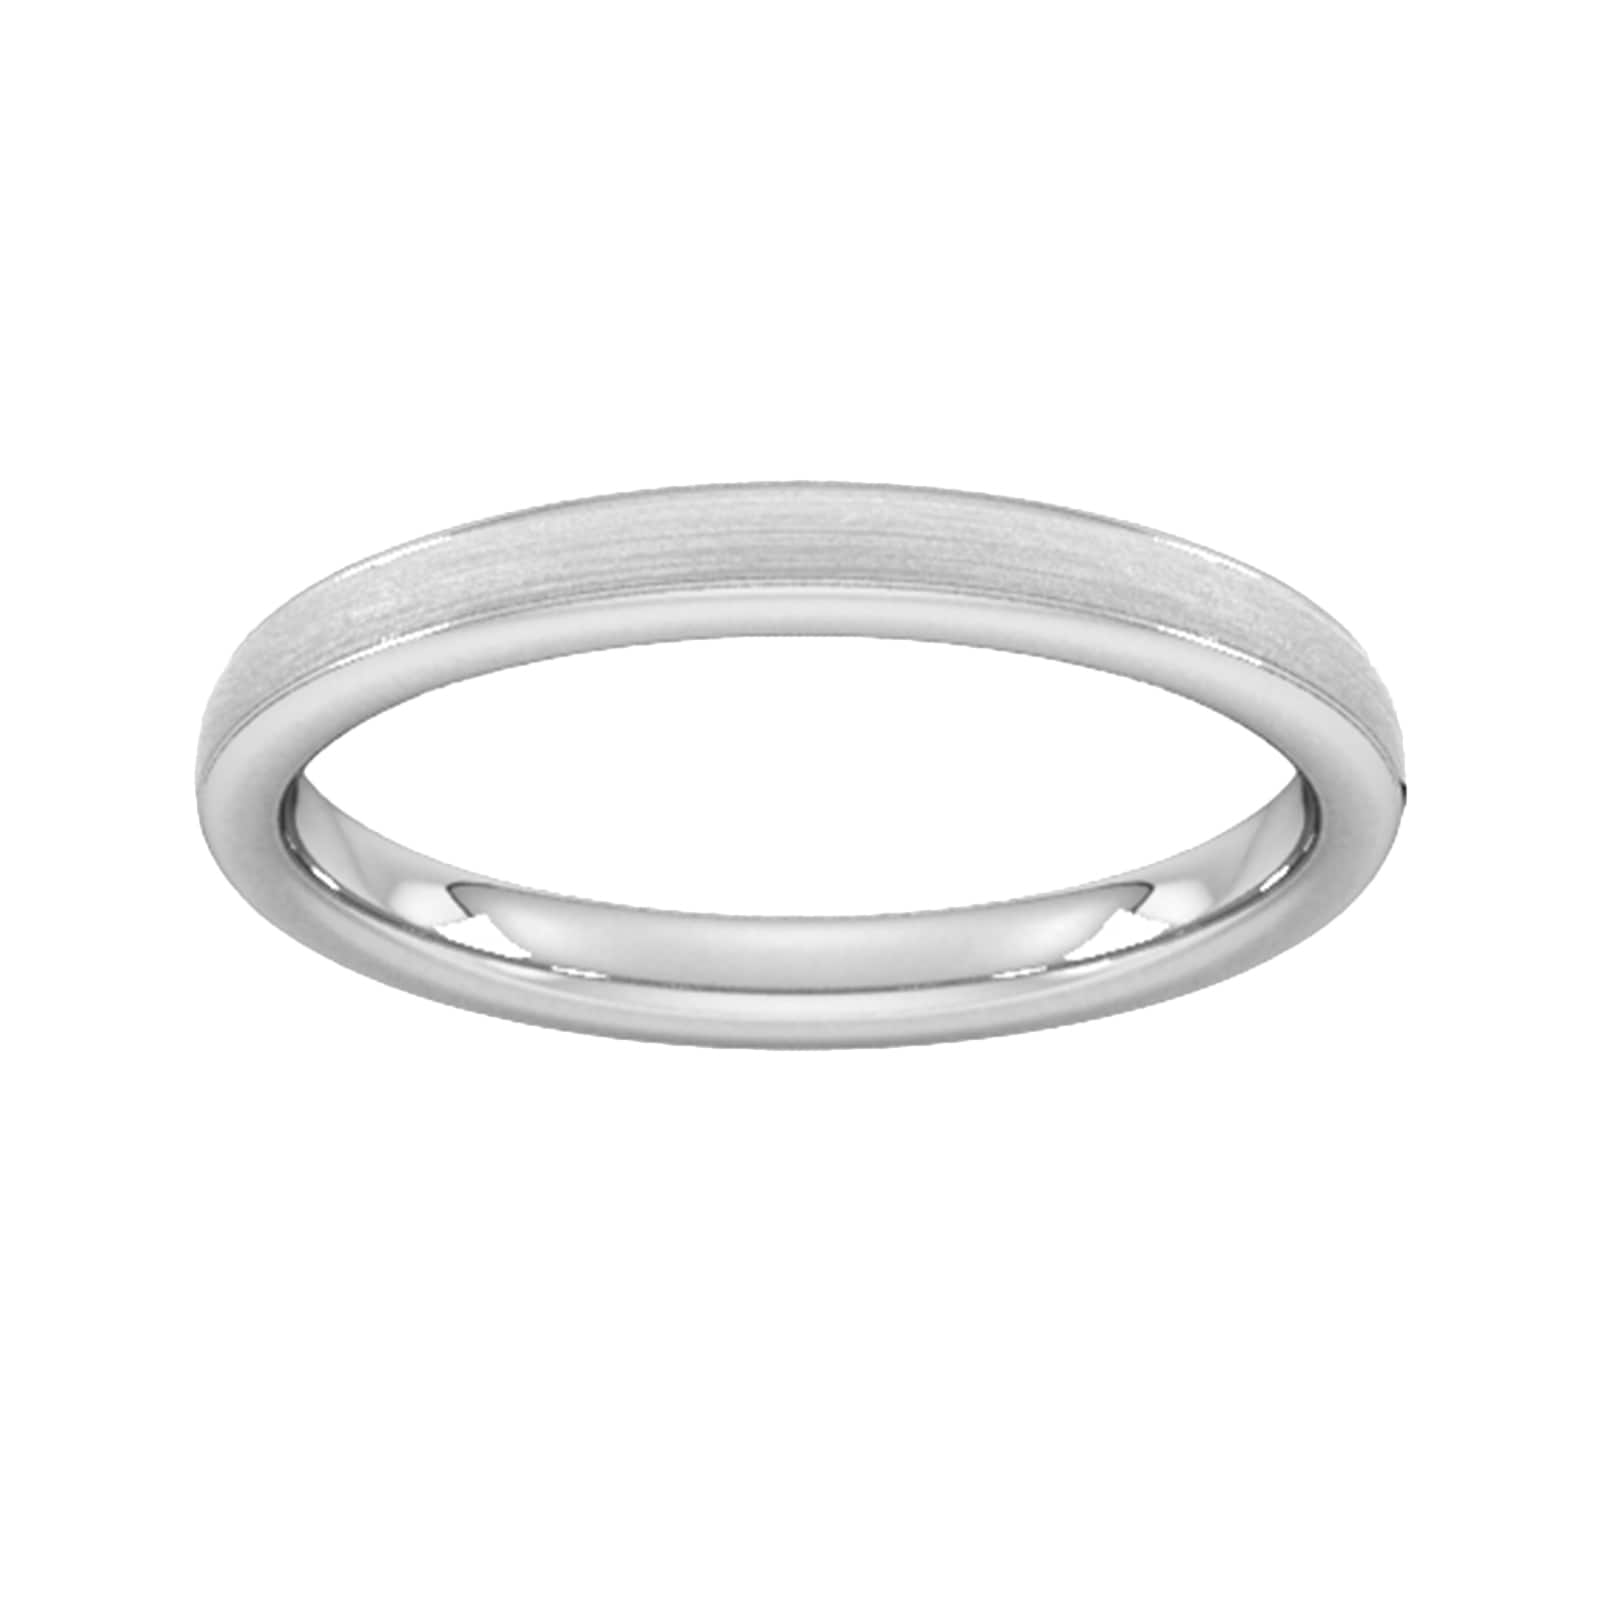 2.5mm D Shape Heavy Matt Centre With Grooves Wedding Ring In 9 Carat White Gold - Ring Size G